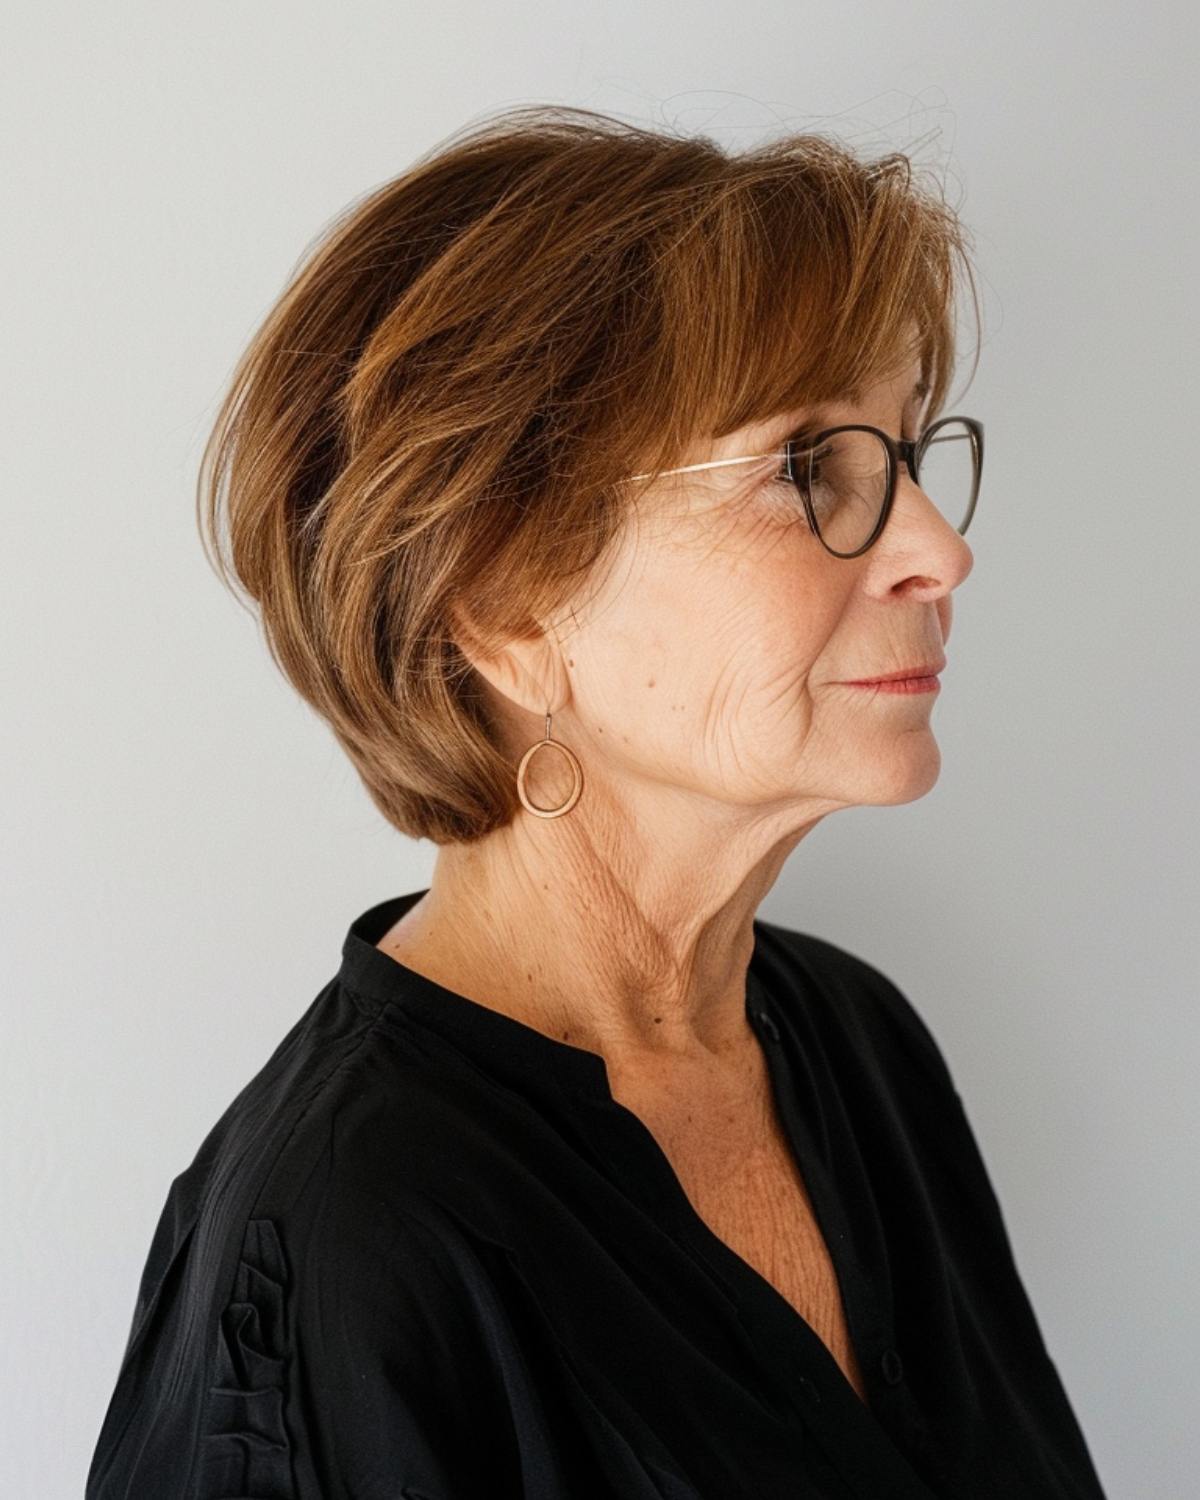 Profile of a woman with a pixie-bob haircut and glasses.